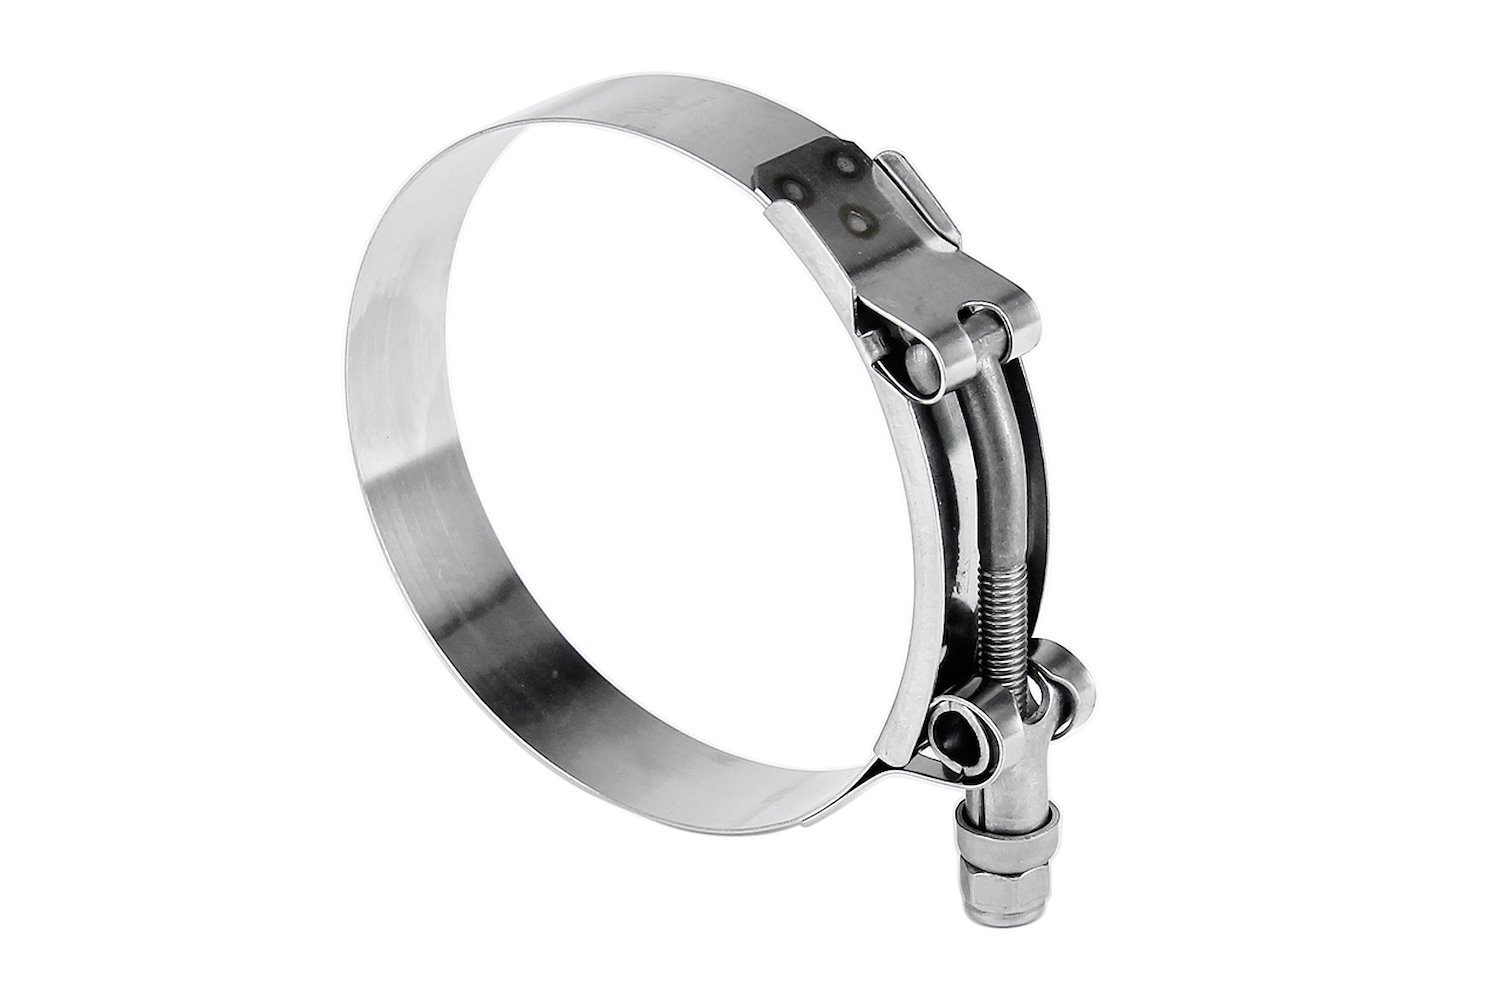 316-SSTC-60-68 100-Percent Marine Grade Stainless Steel T-Bolt Hose Clamp, Size #48, Range: 2.38 in.- 2.68 in.